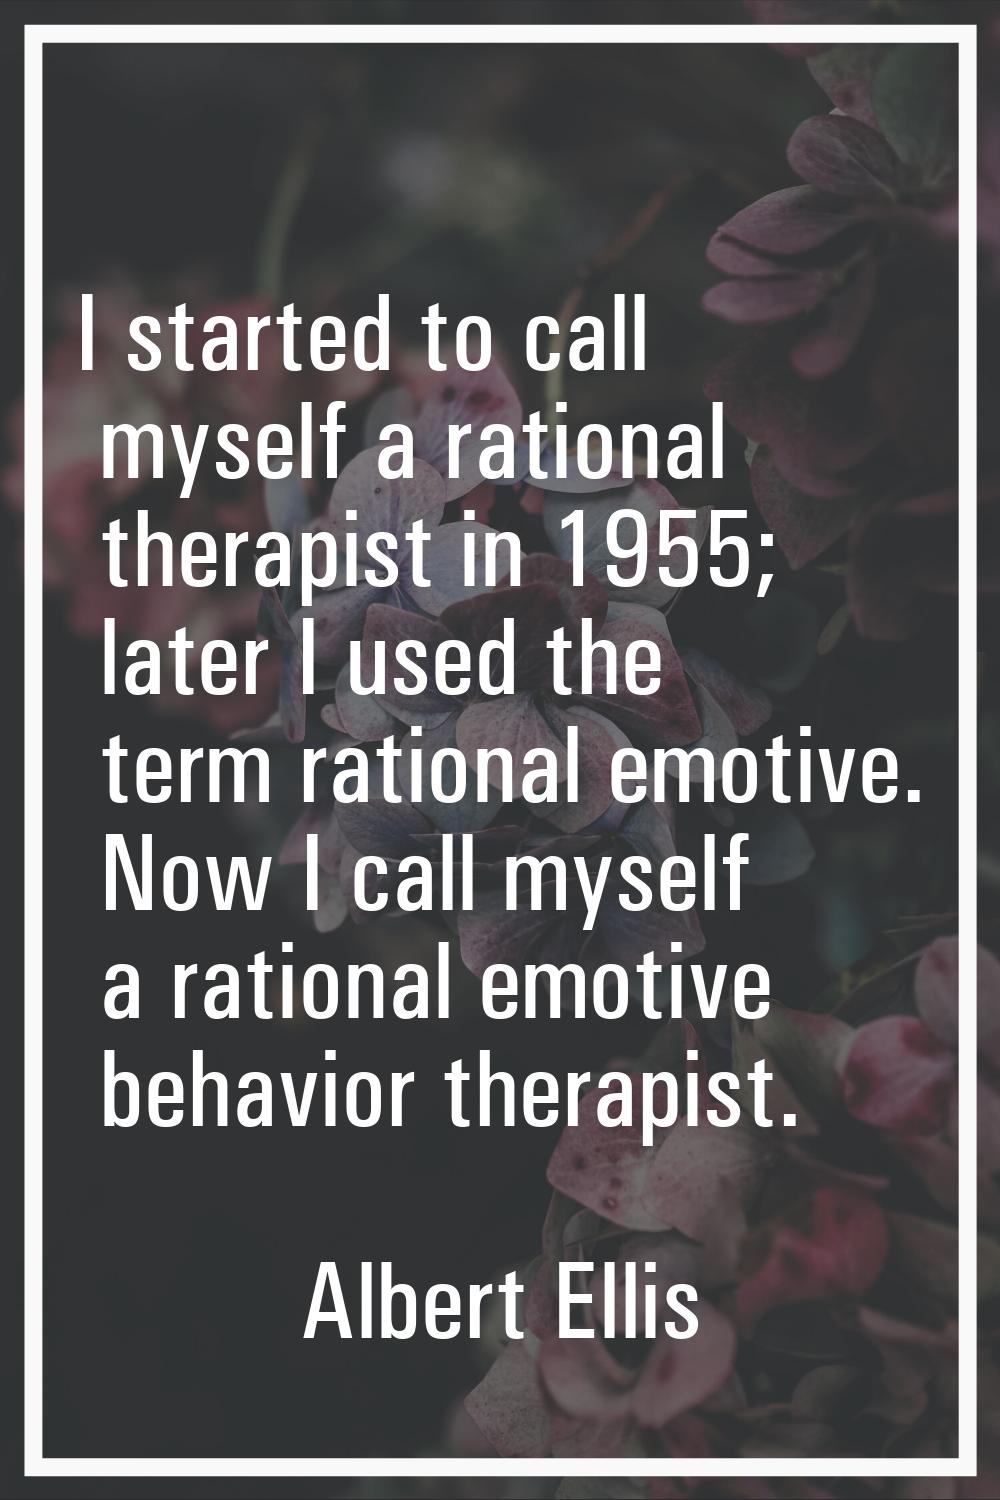 I started to call myself a rational therapist in 1955; later I used the term rational emotive. Now 